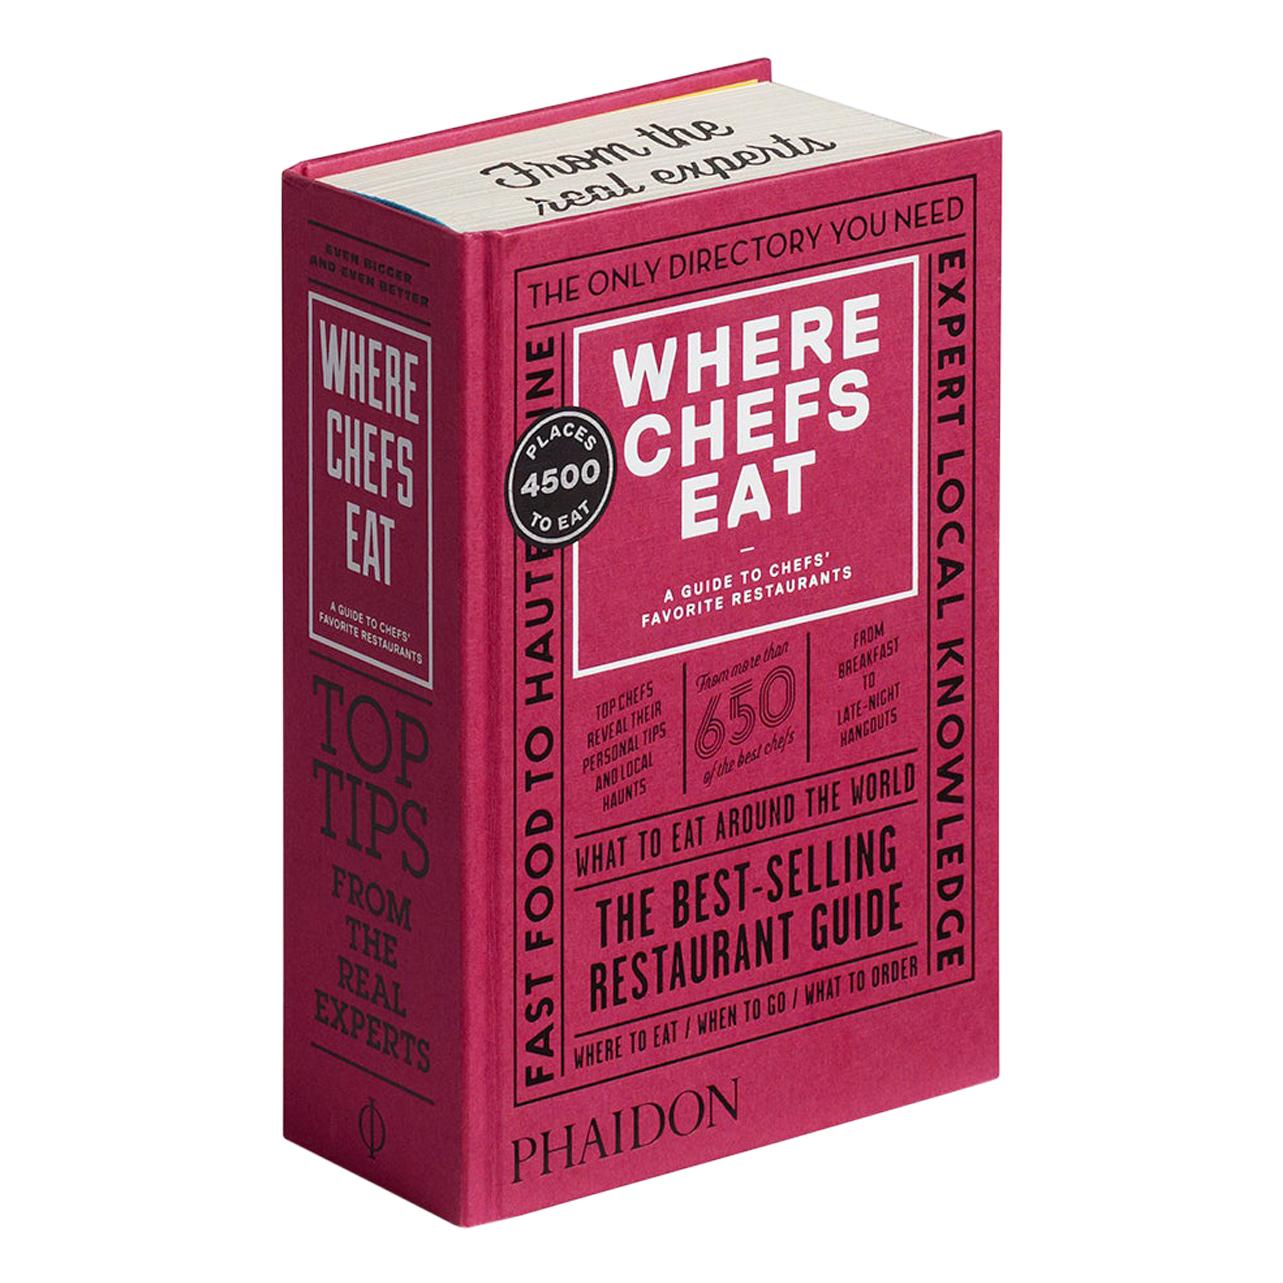 Where Chefs Eat Book - A Guide to Chefs' Favorite Restaurants